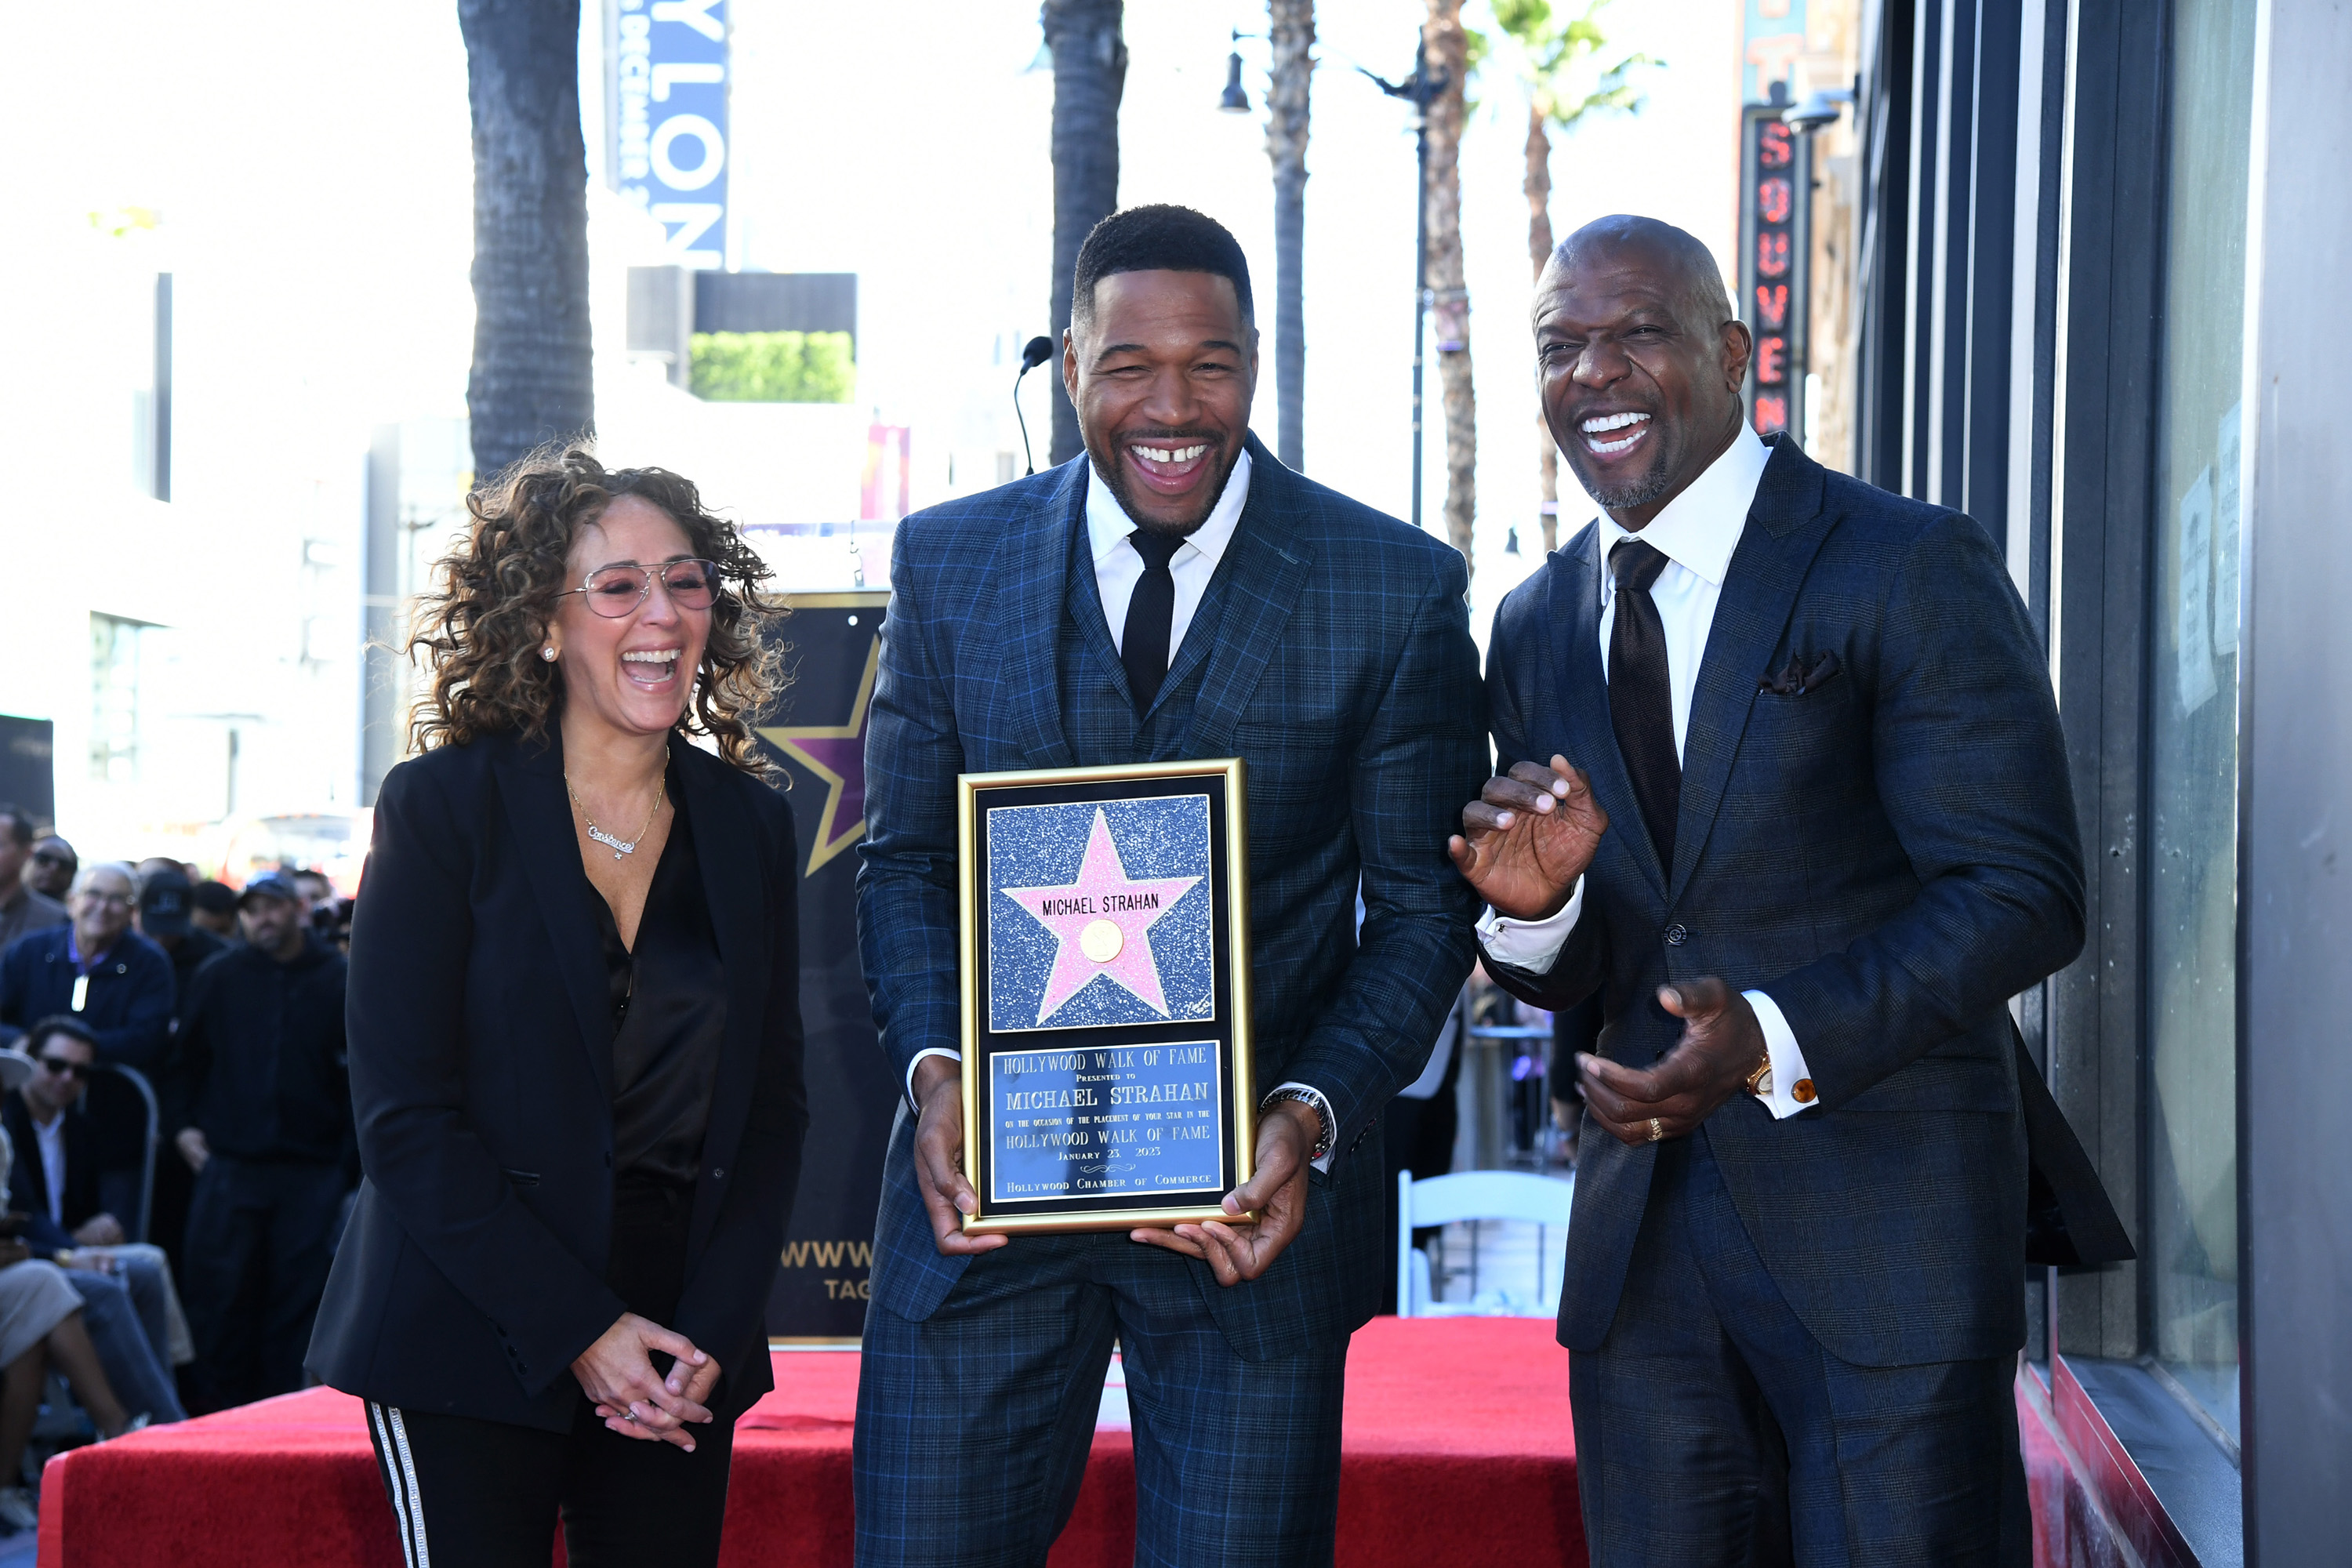 (L-R) Constance Schwartz, Michael Strahan and Terry Crews attend the Hollywood Walk of Fame star ceremony honoring Strahan on Jan. 23, 2023, in Los Angeles, Calif.